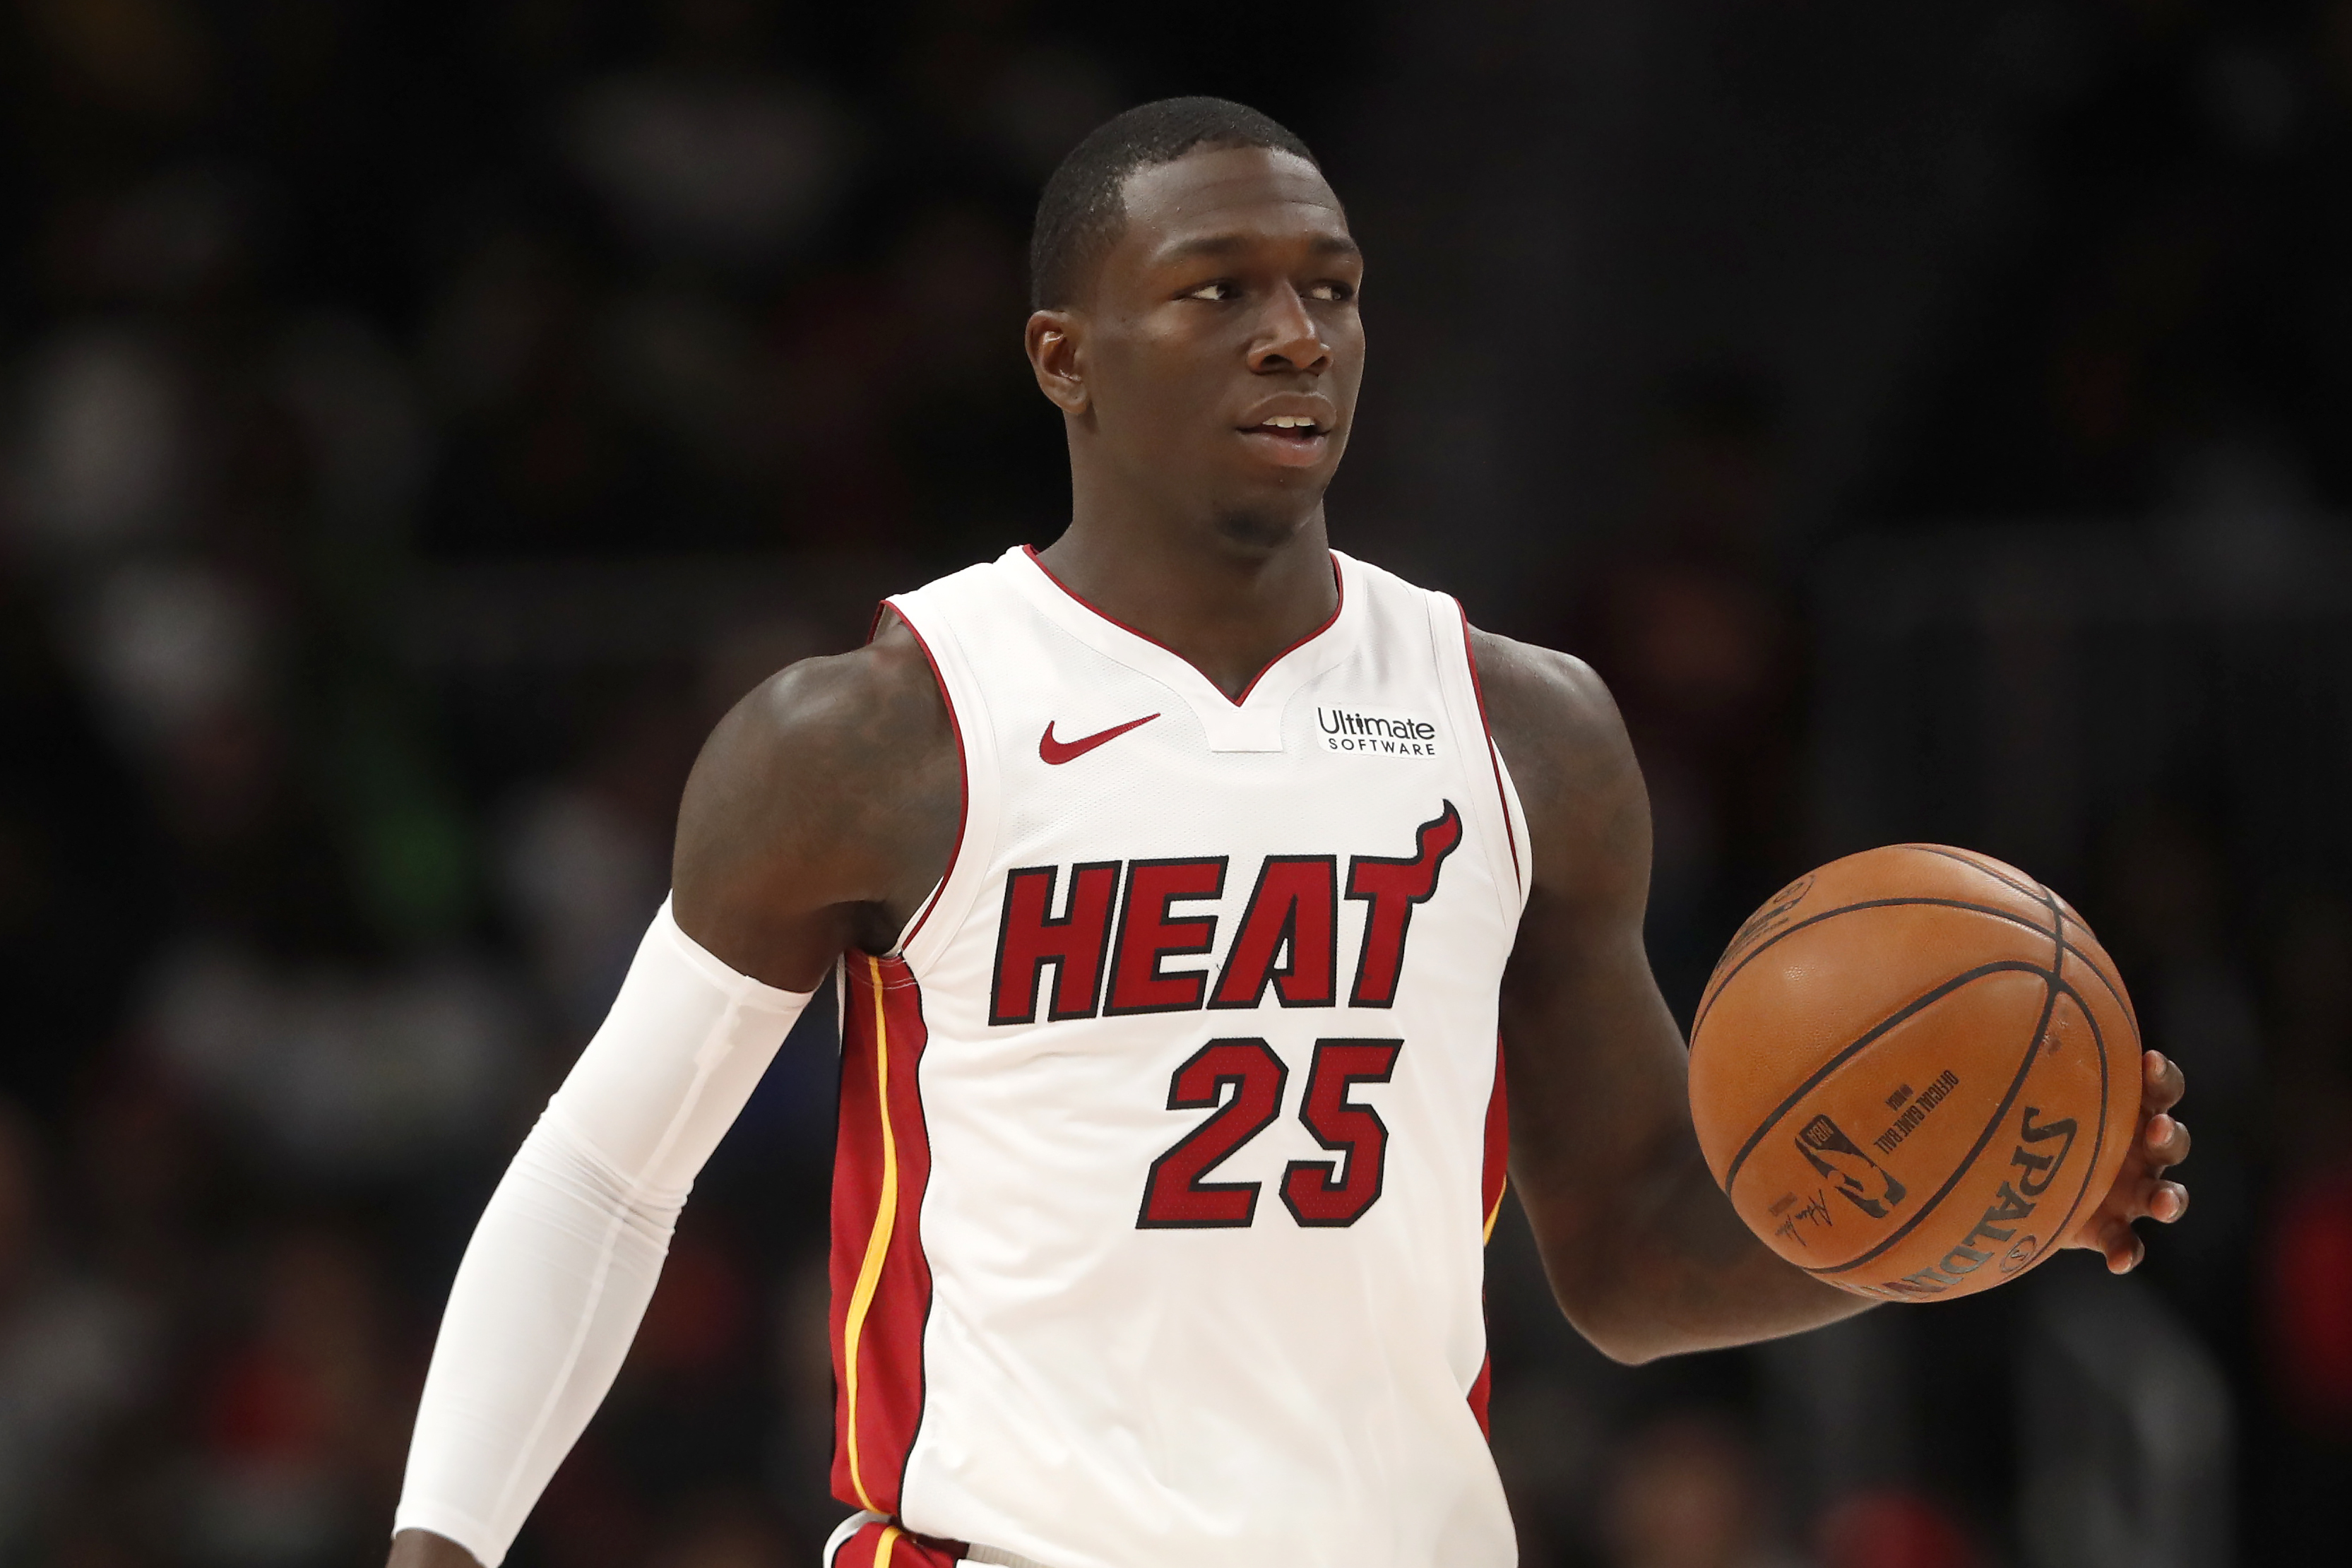 Nunn has 28 points, Heat beat Hawks for 2nd time in 3 days